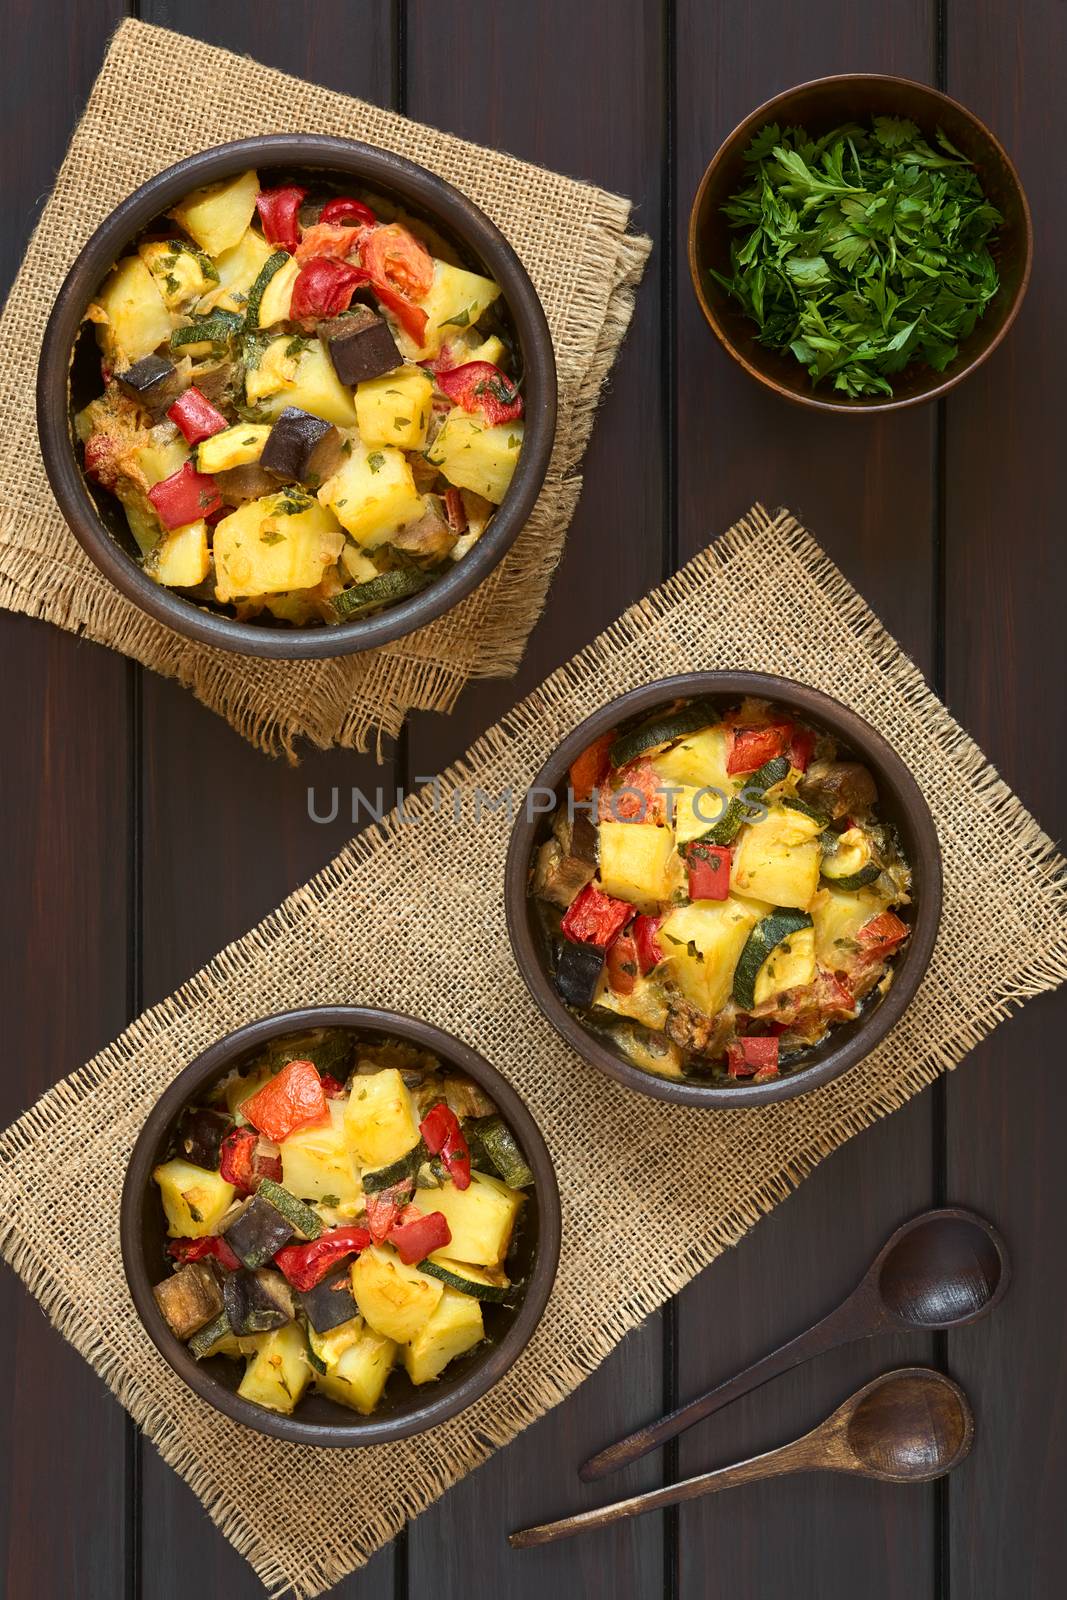 Baked potato, eggplant, zucchini and tomato casserole in rustic bowls, photographed overhead on dark wood with natural light